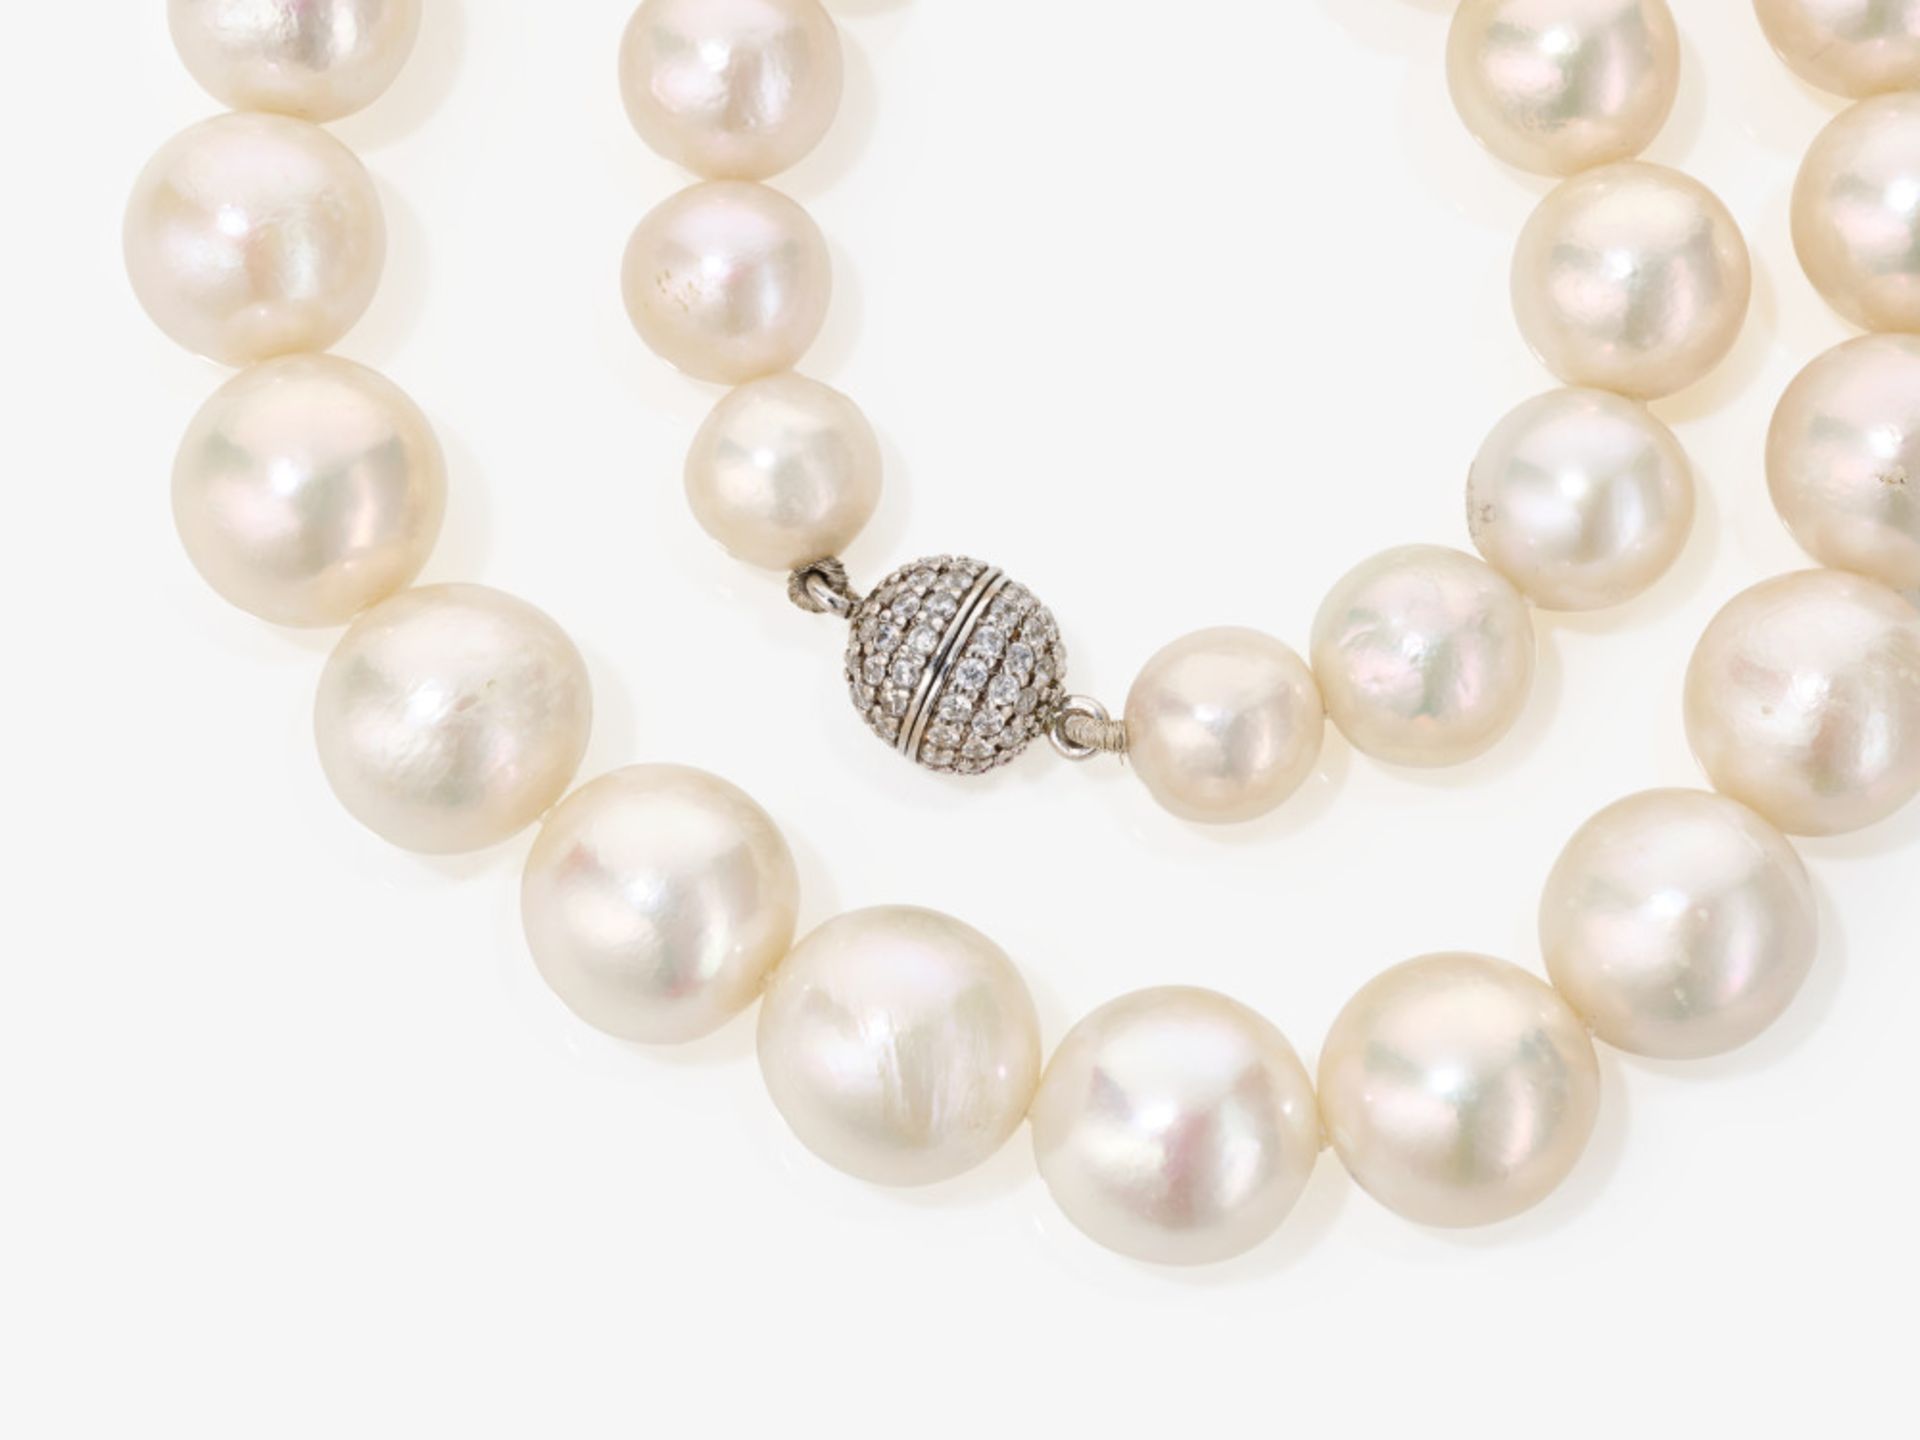 A freshwater cultured pearl necklace